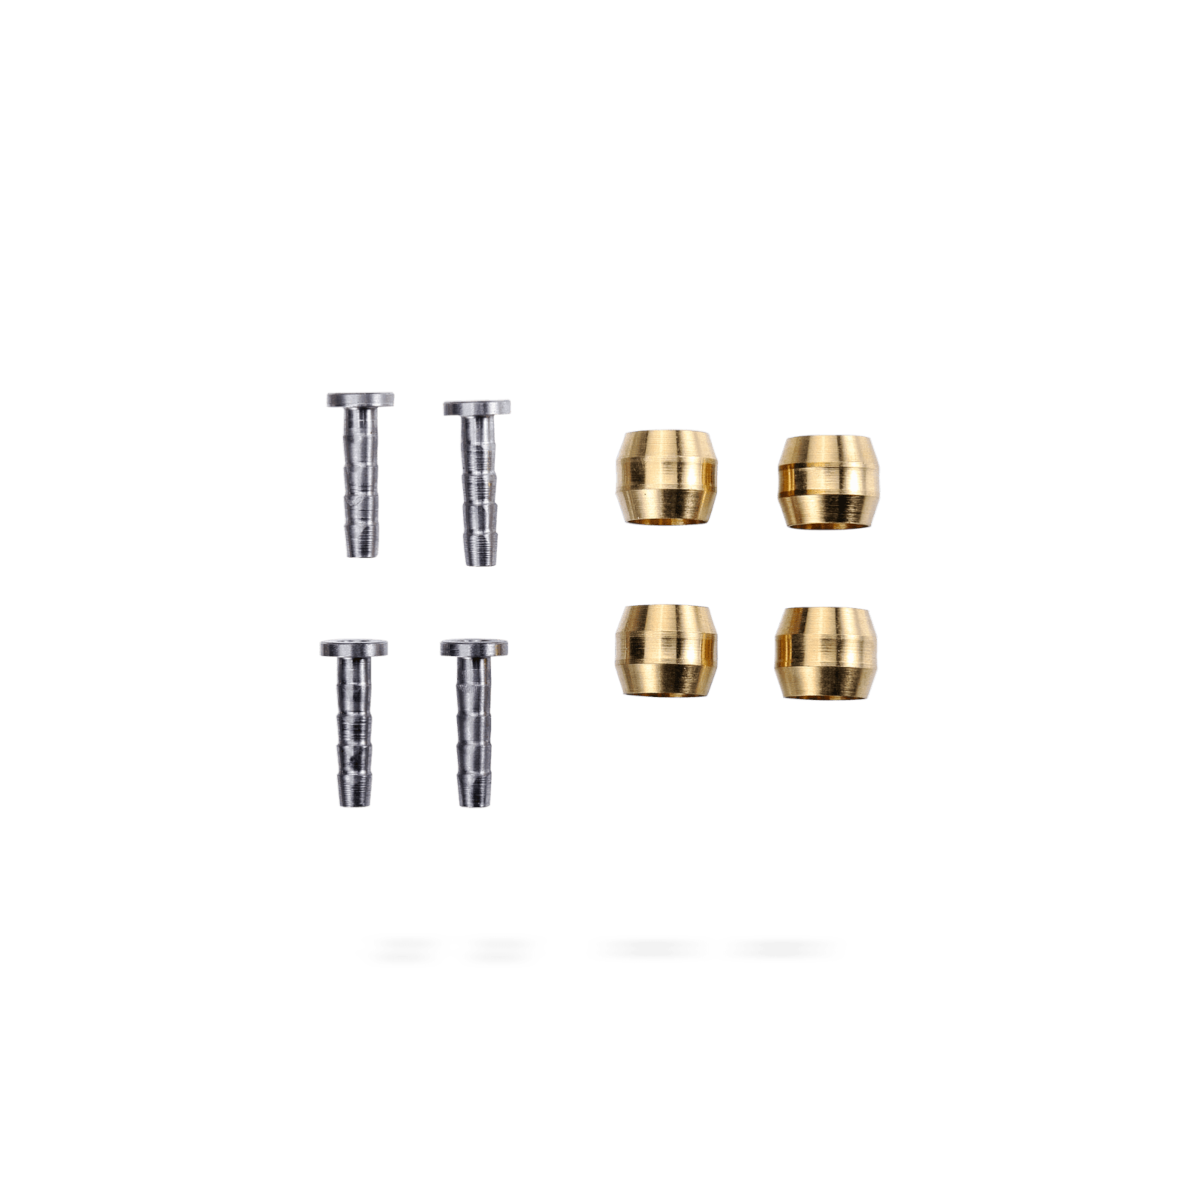 BBB Kit embouts de durite hydraulique FittingKit compatible Shimano